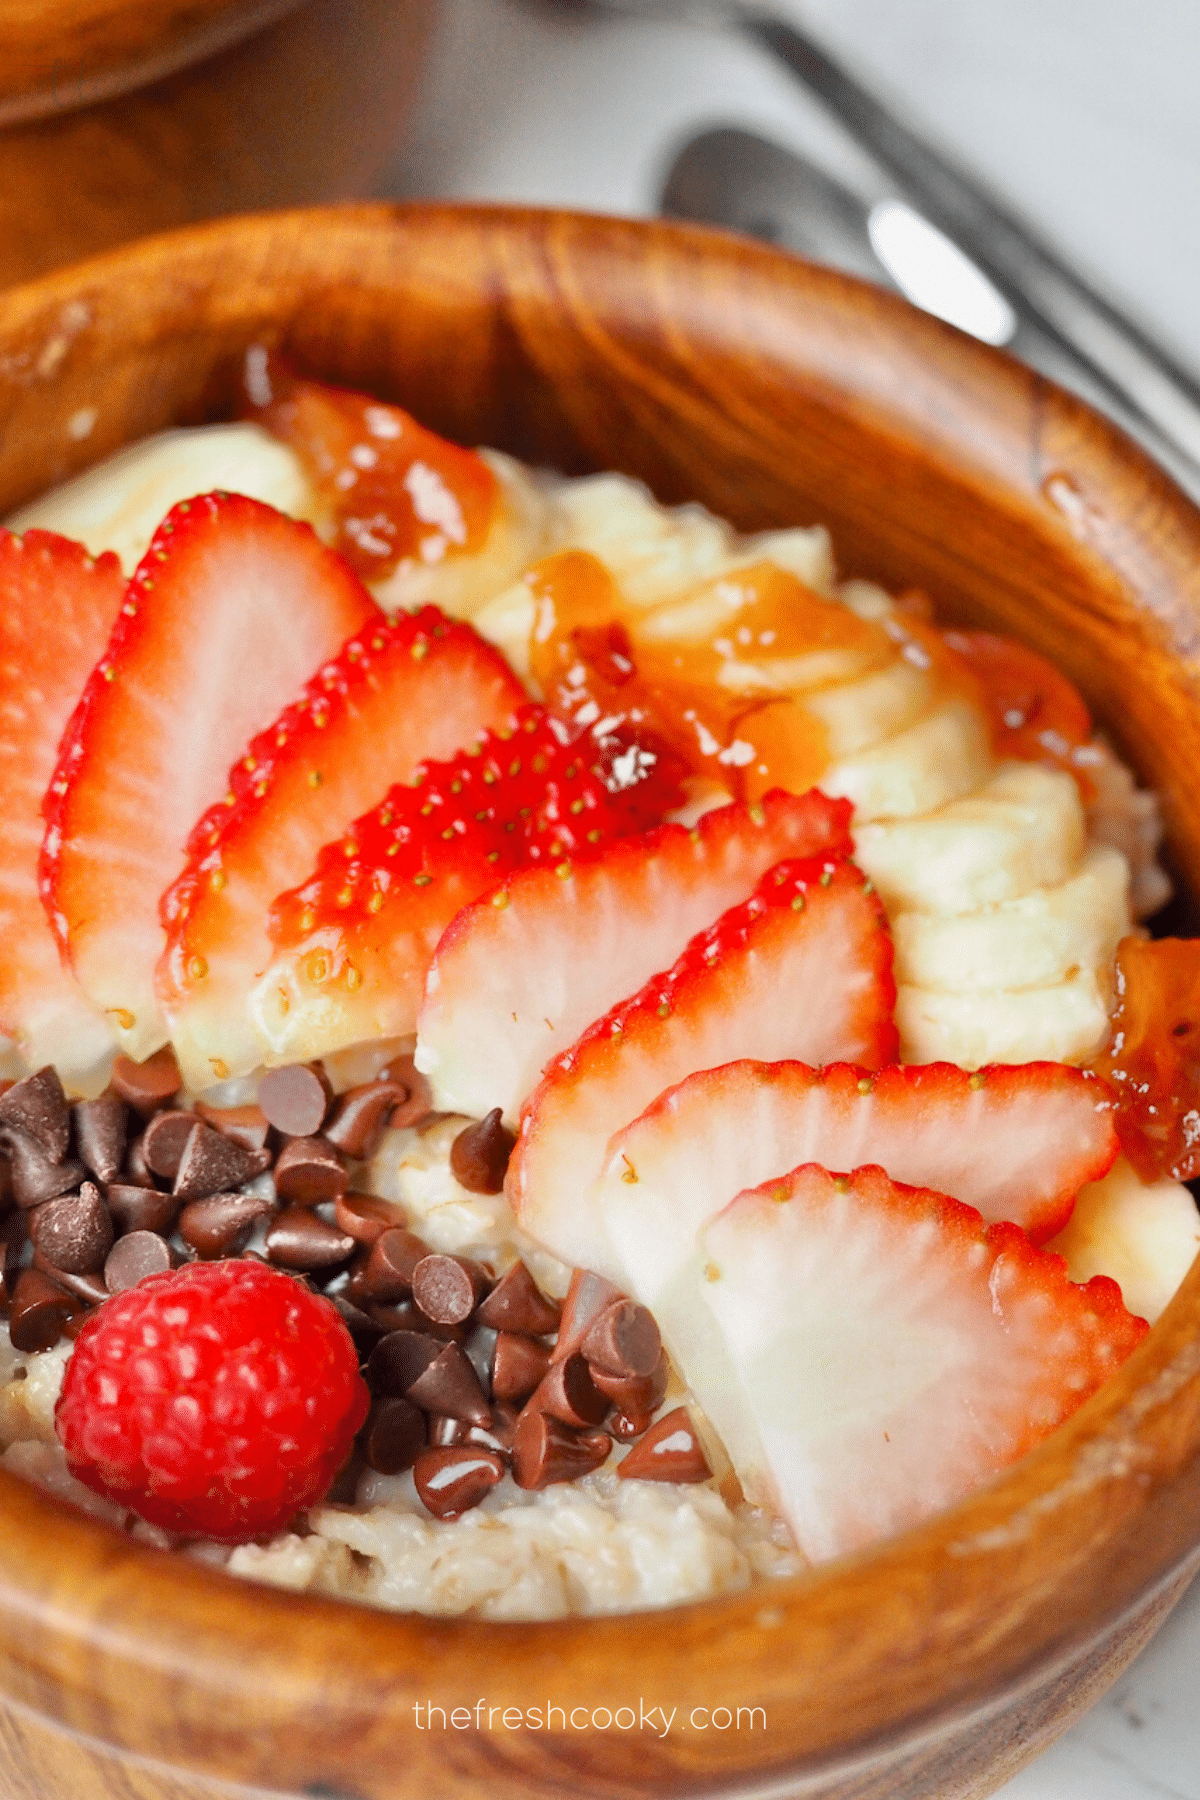 Old Fashioned Rolled Oats made in the instant pot, in a wooden bowl with sliced bananas, strawberries and mini chocolate chips.